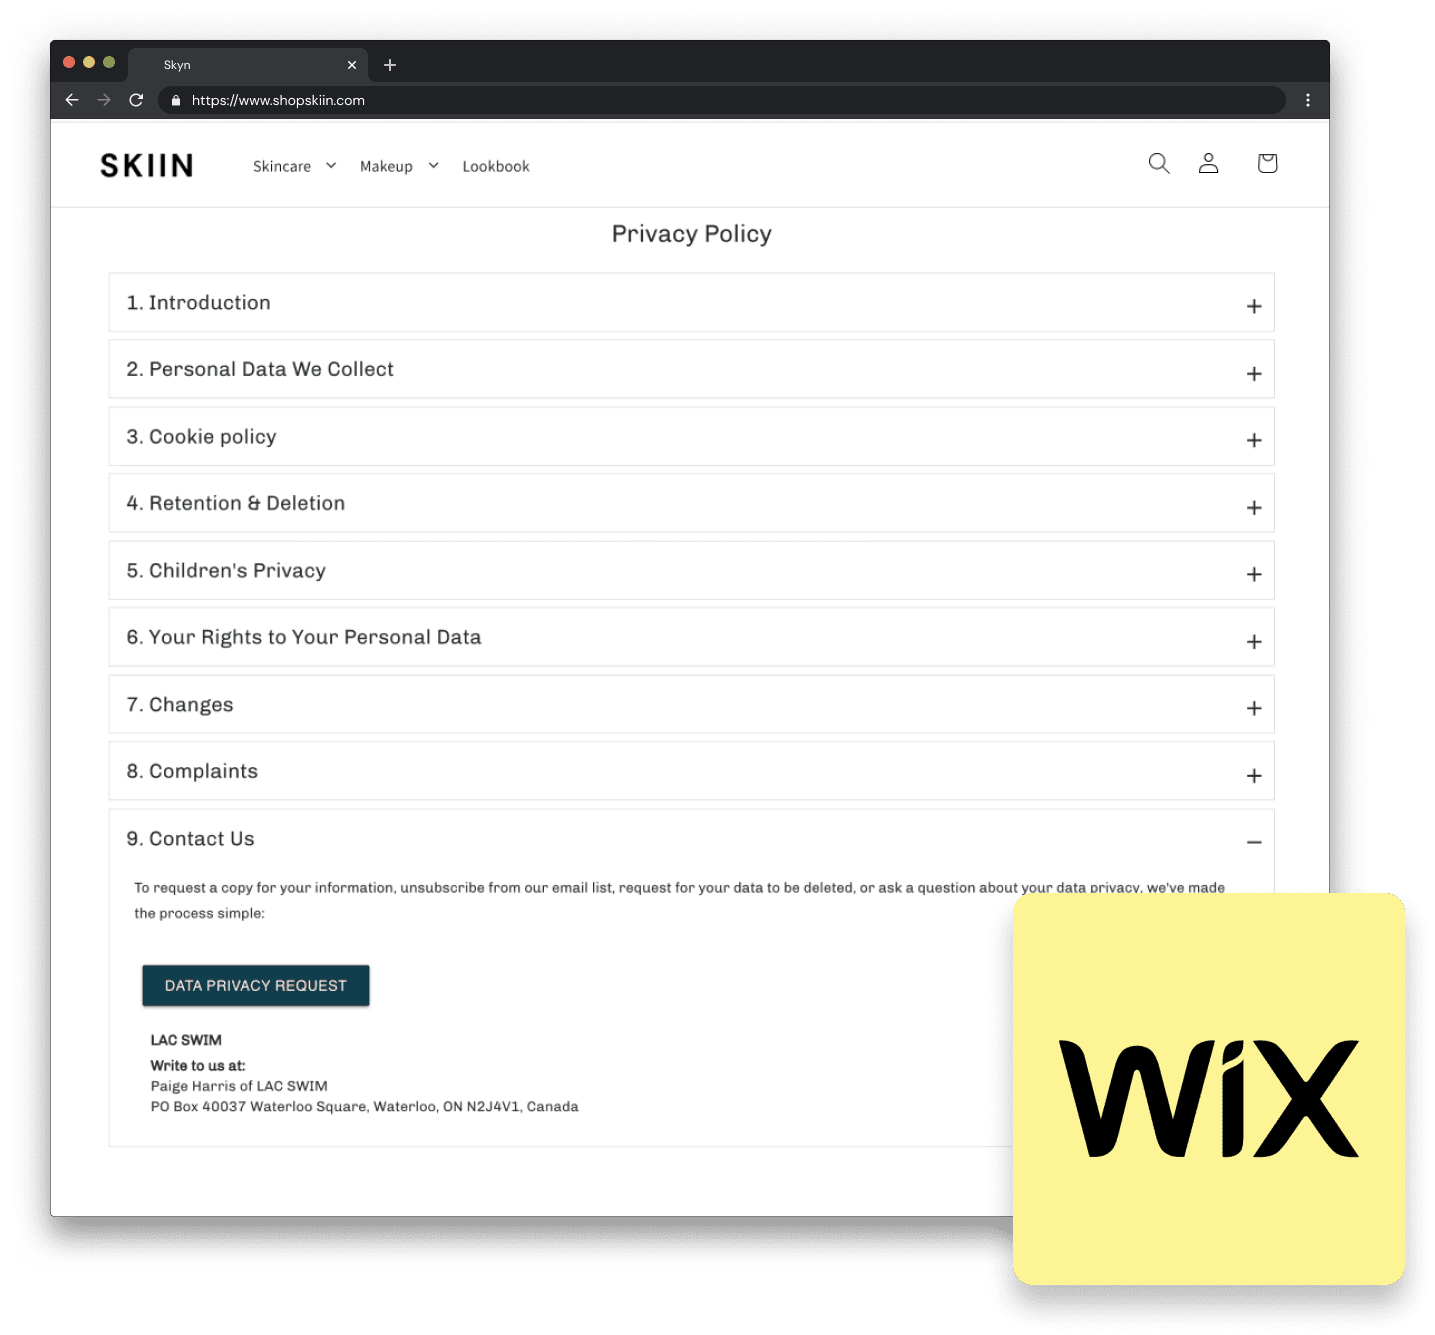 Branded App by Wix Request: Adding More Login Options, Help Center